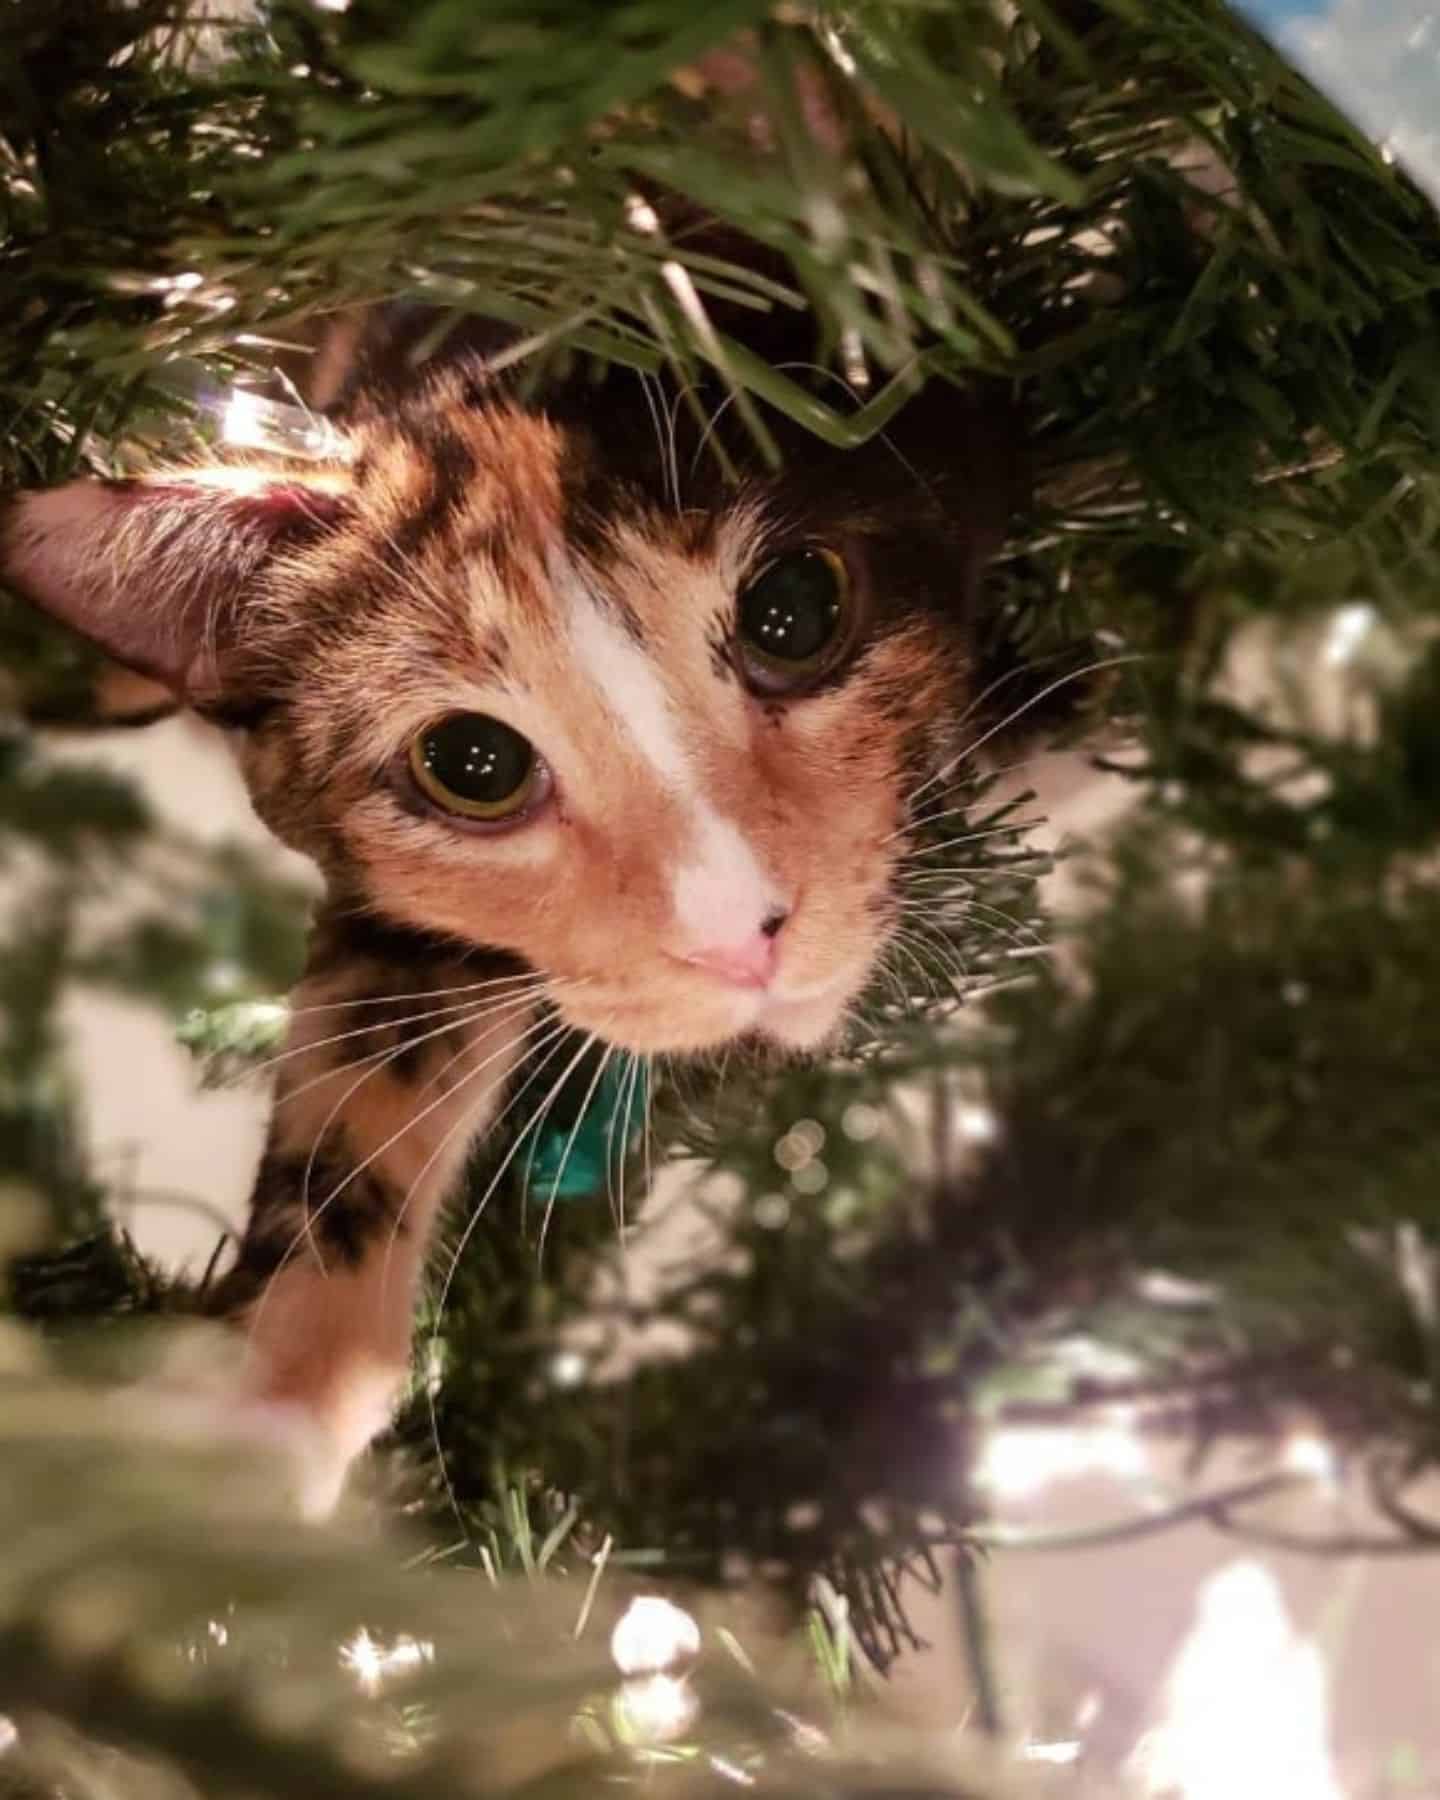 cat in a christmas tree close-up